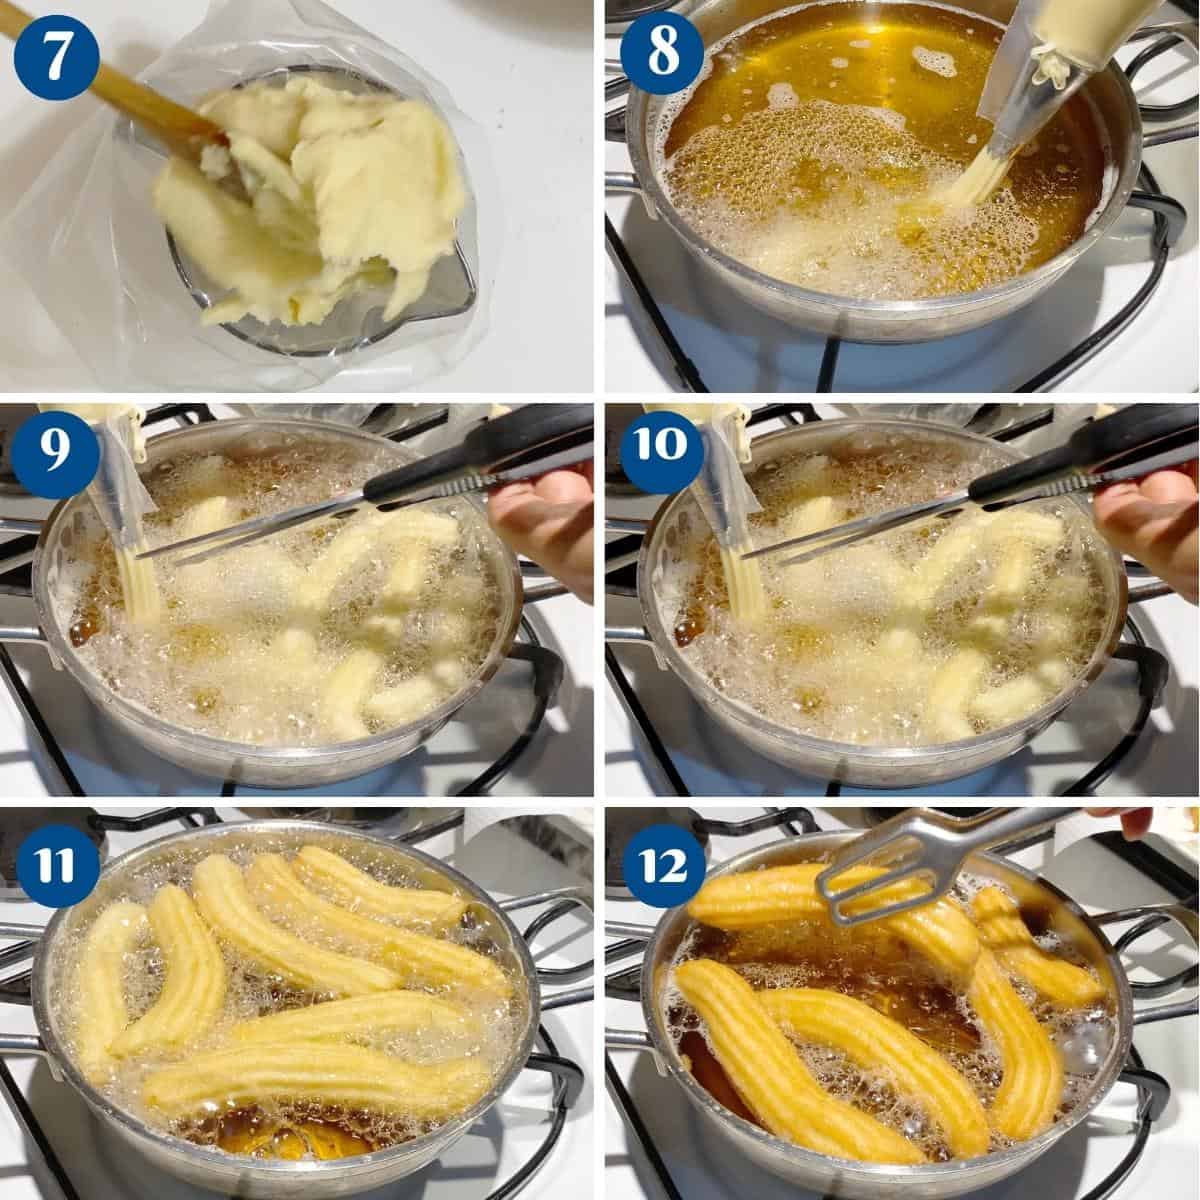 Progress pictures deep frying the churros.